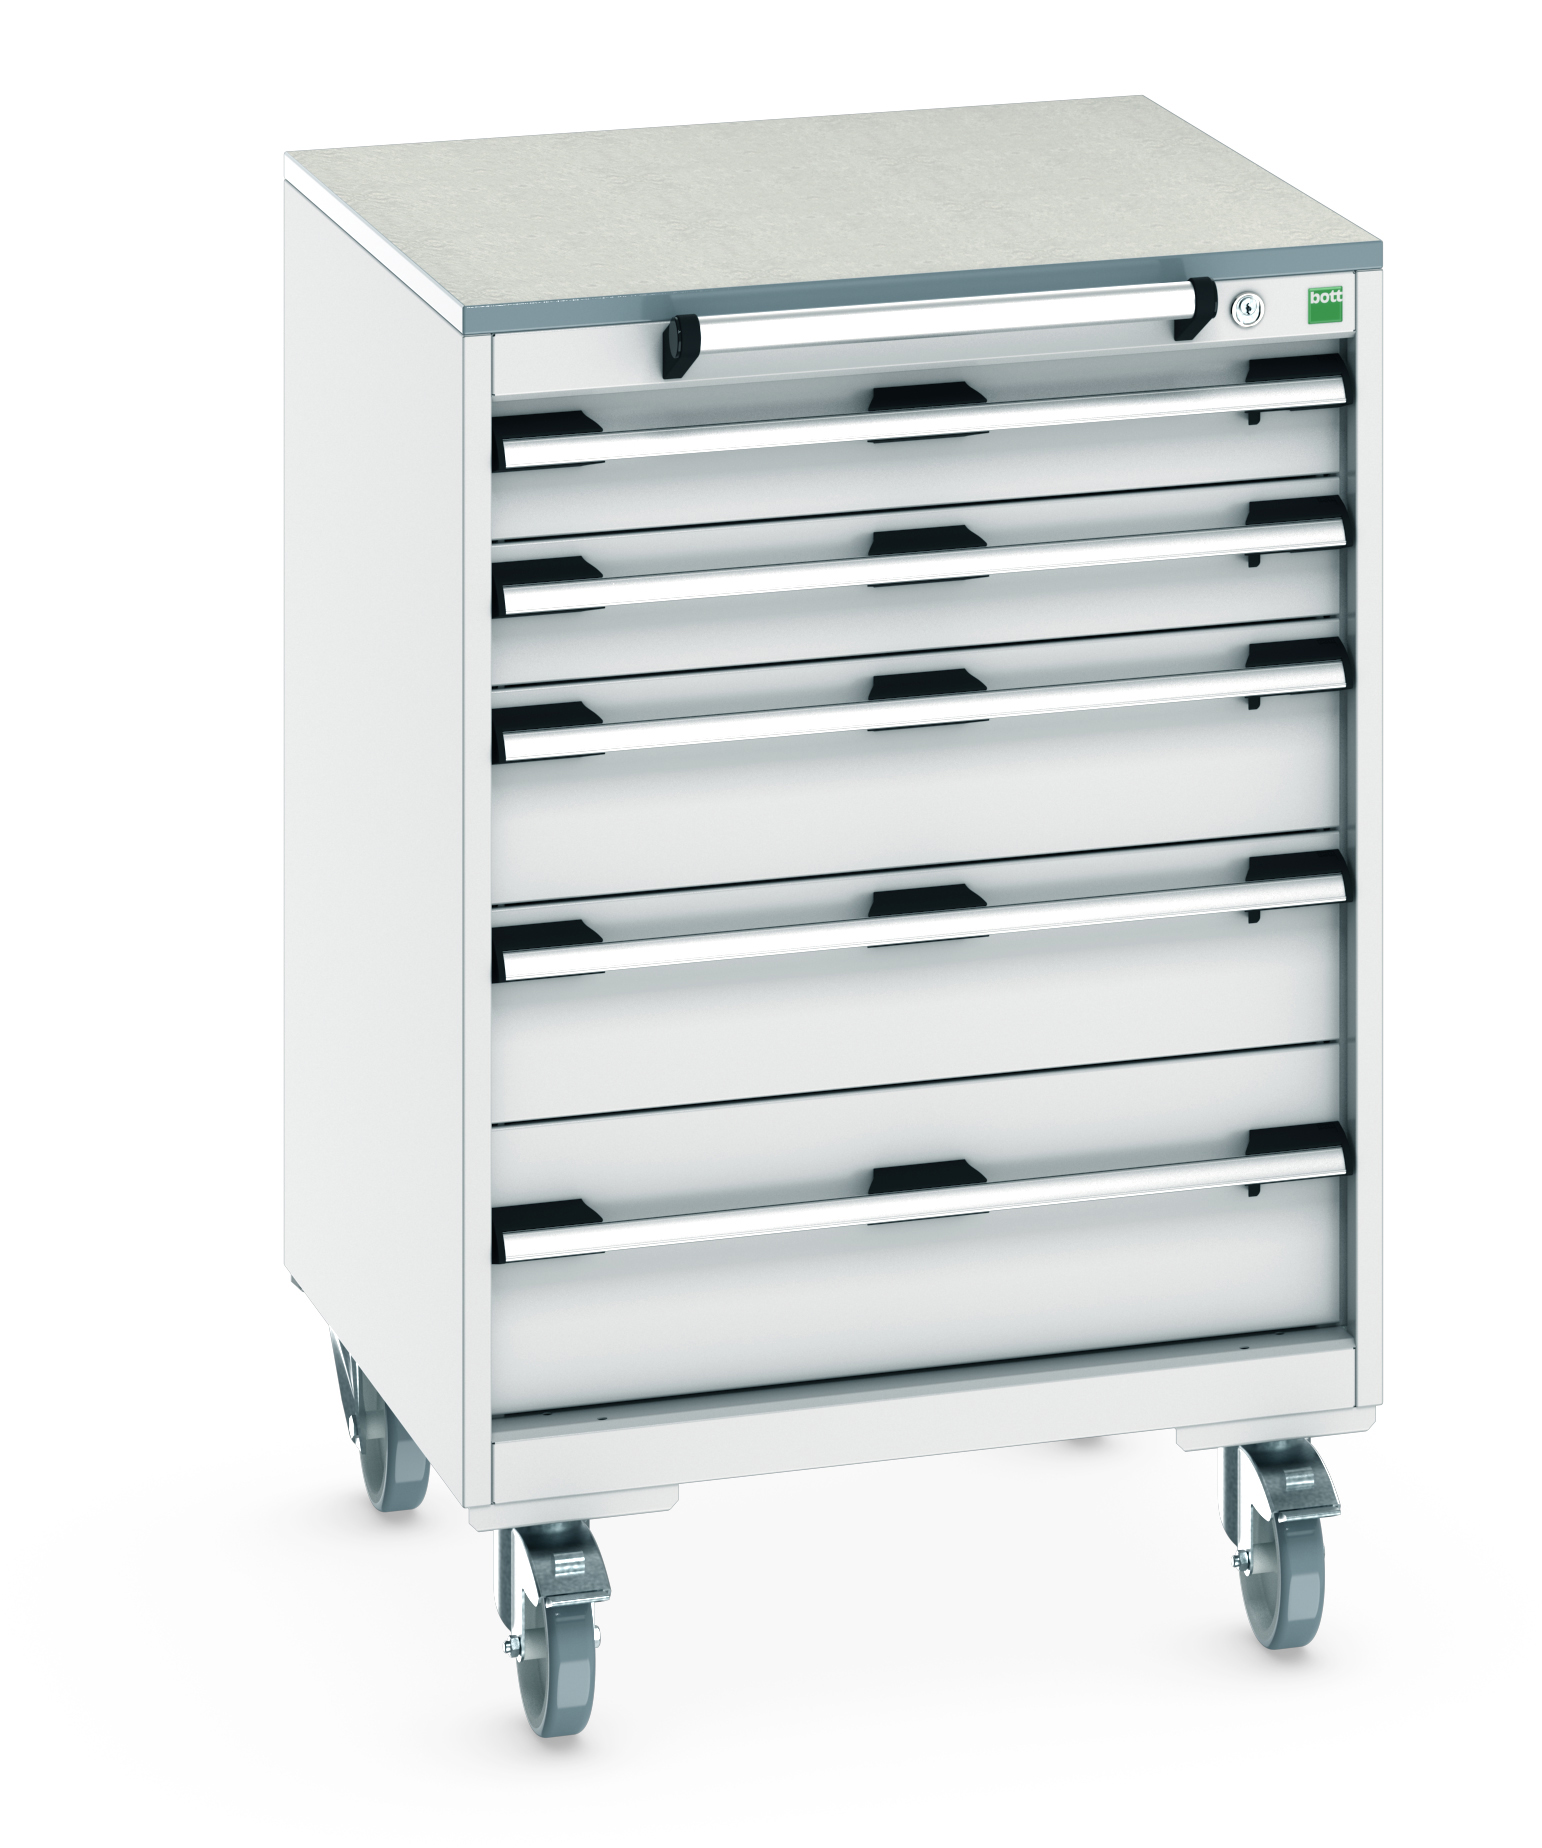 Bott Cubio Mobile Drawer Cabinet With 5 Drawers & Lino Worktop - 40402150.16V